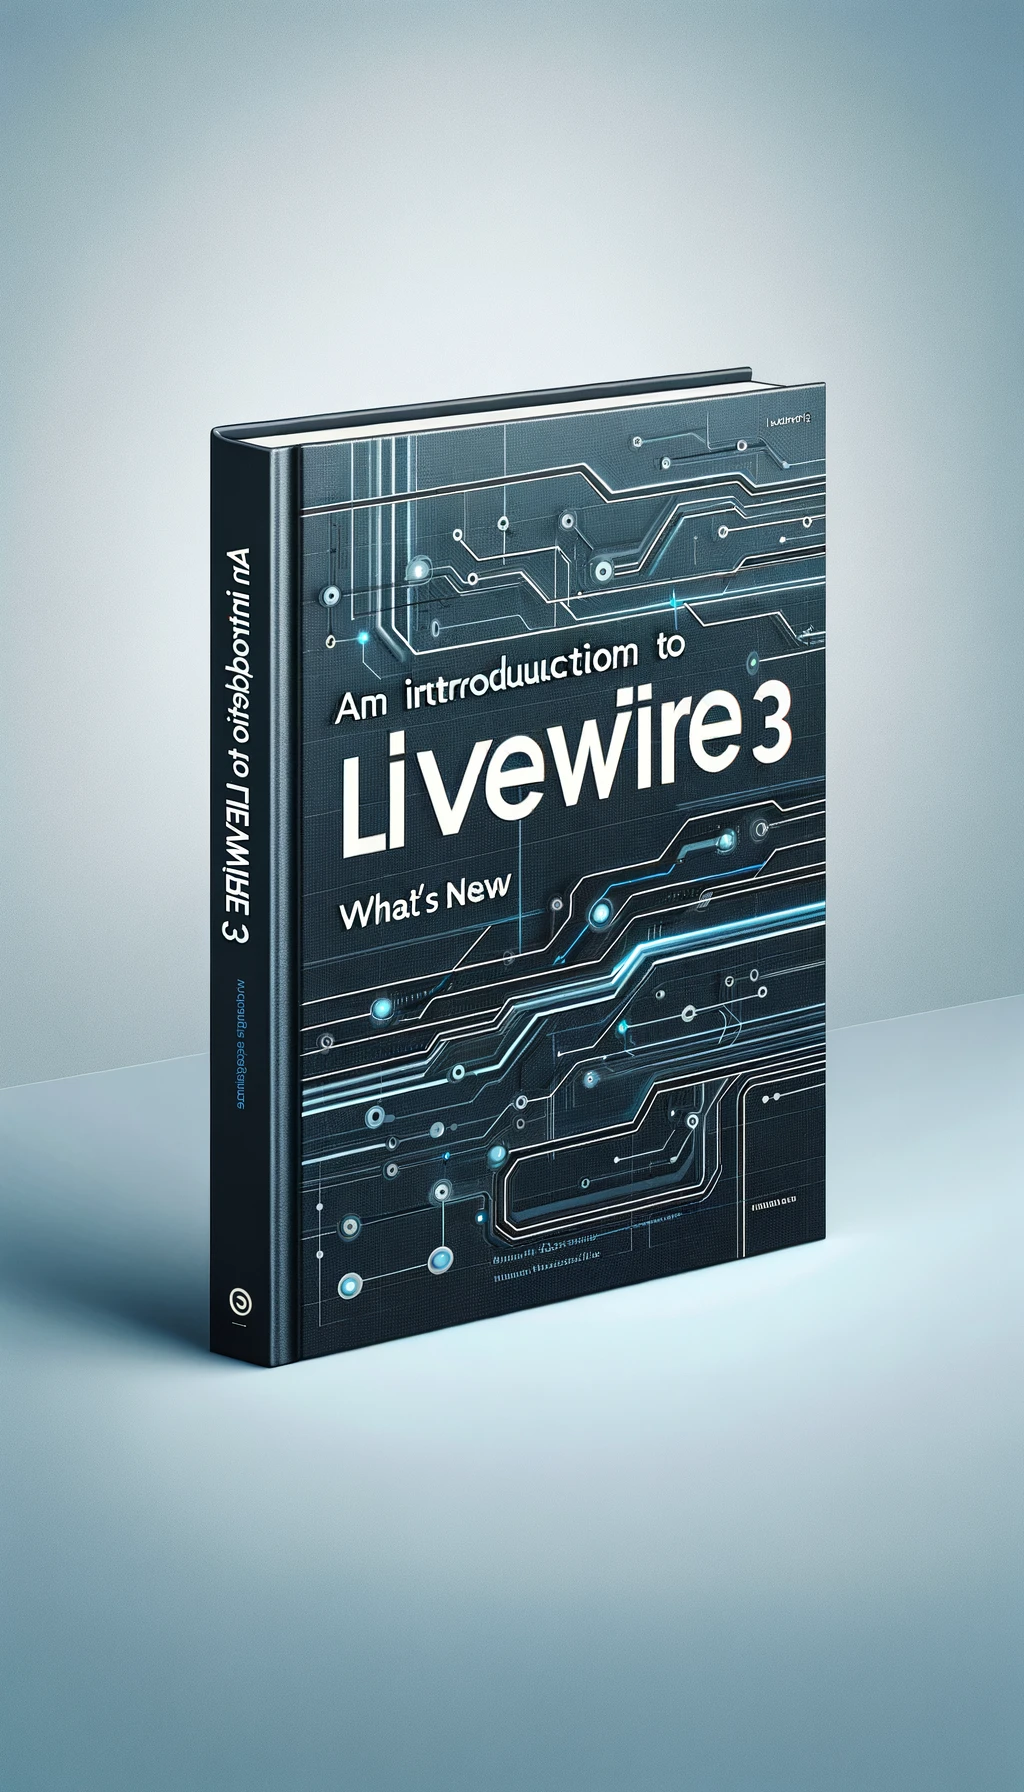 An Introduction to Livewire 3: What's New?